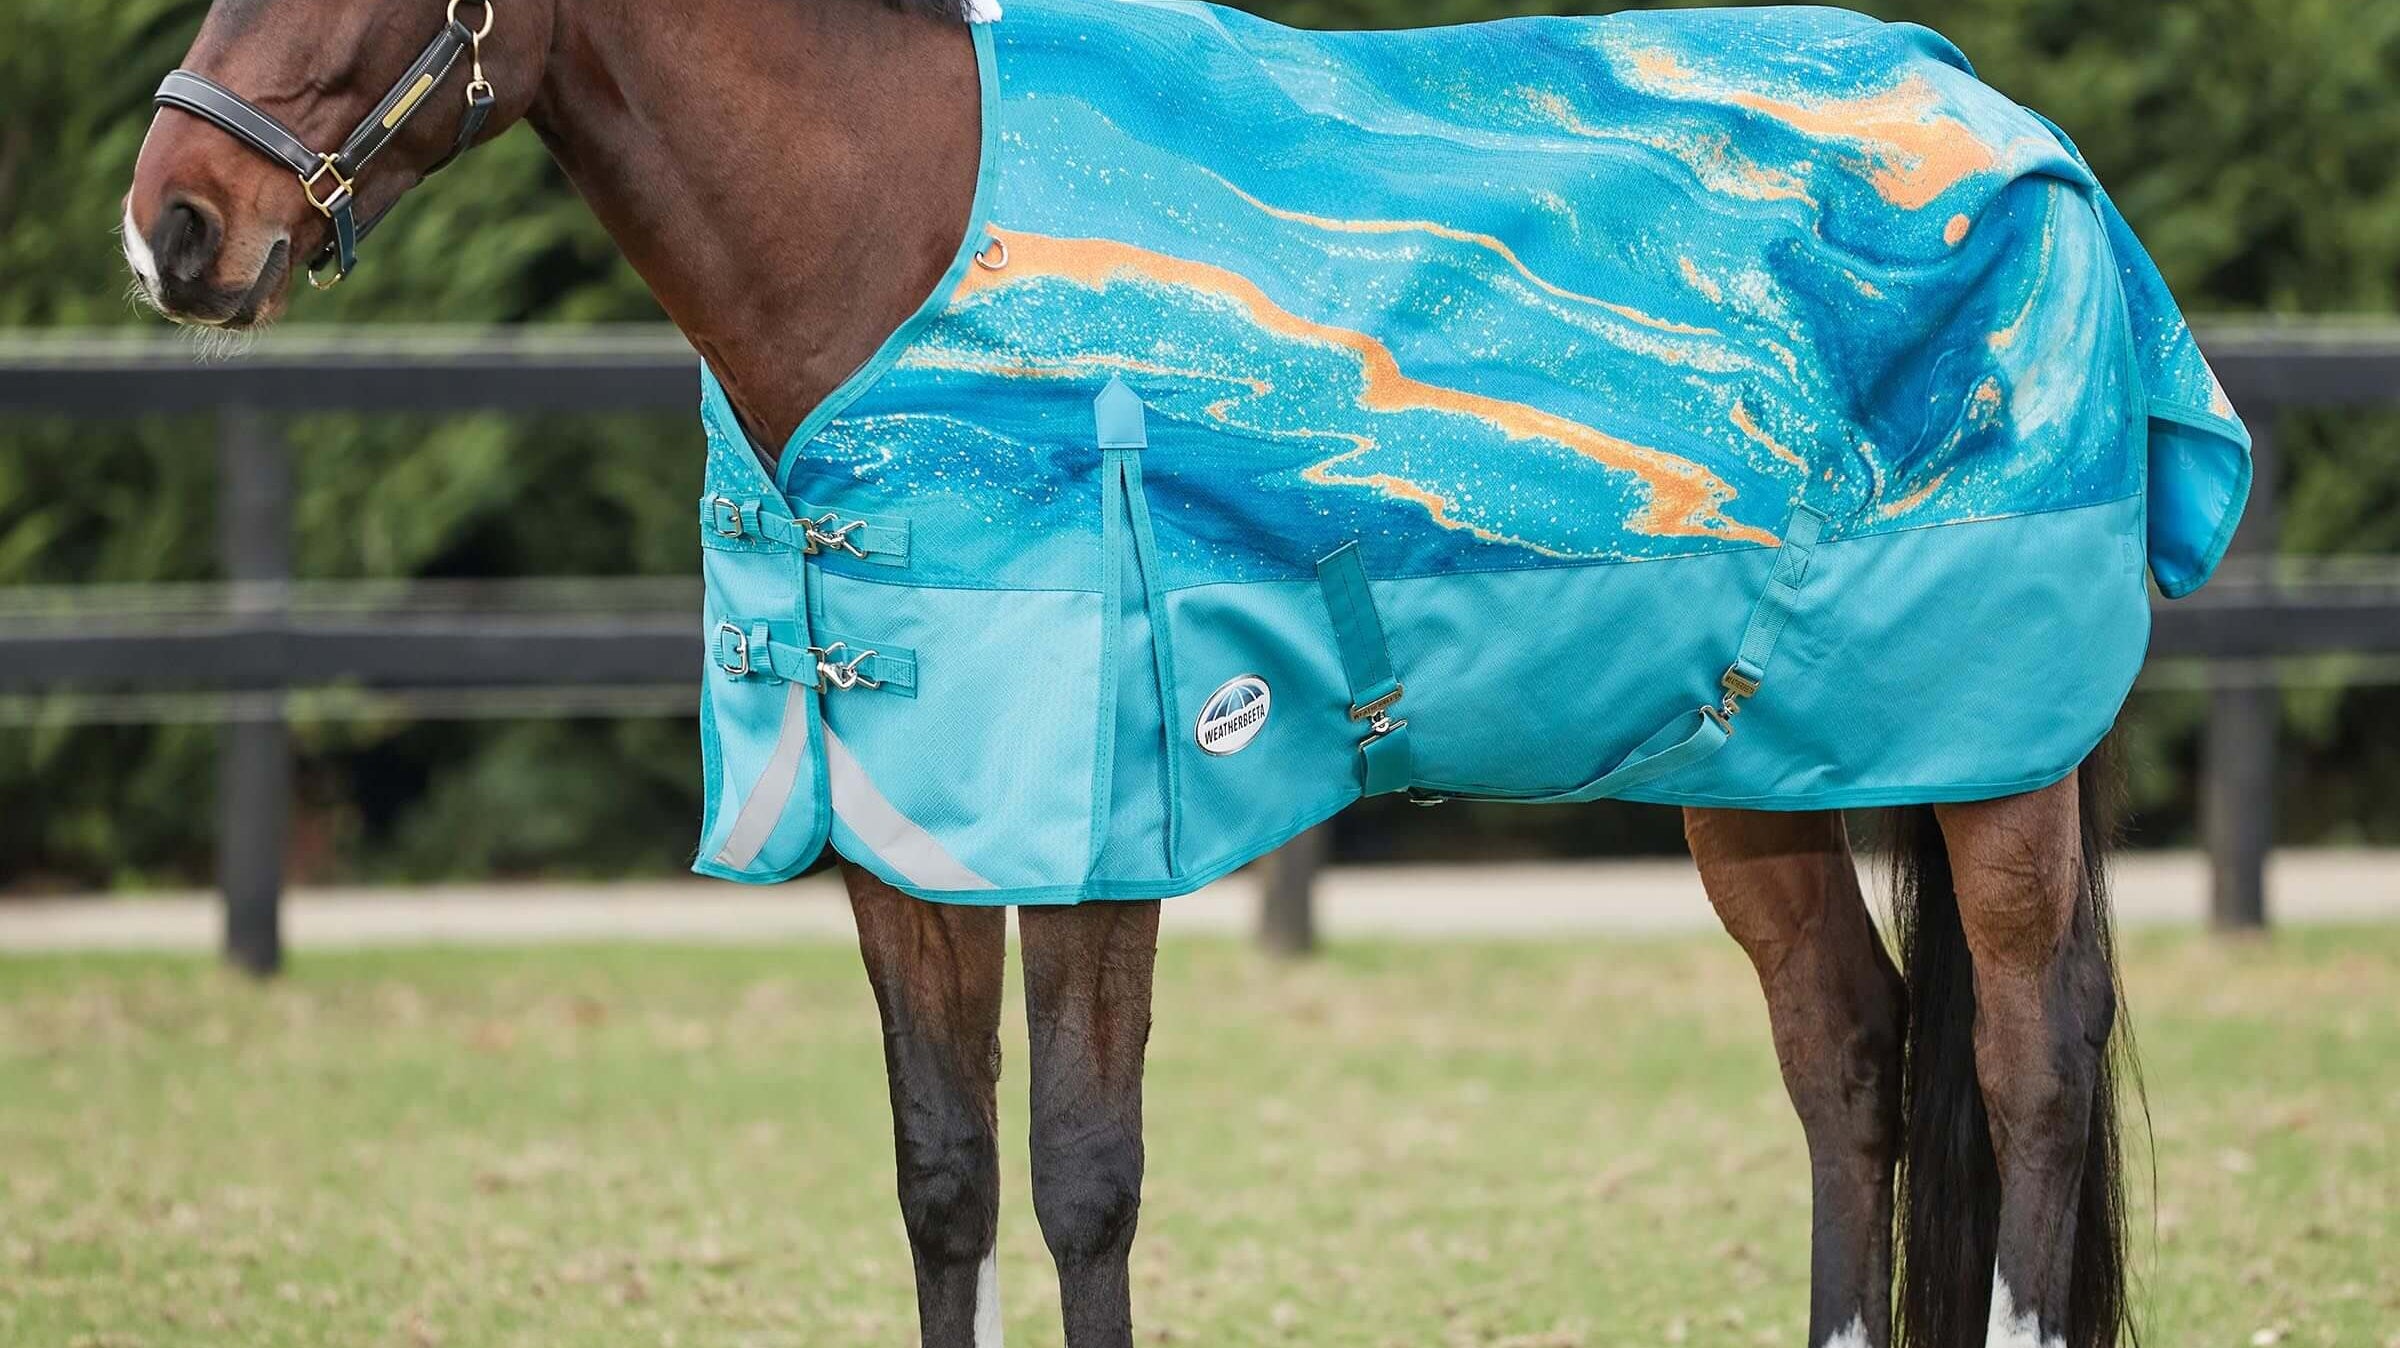 Our Top 10 Lightweight Horse Rugs: Top Picks and Everything You Need to Know